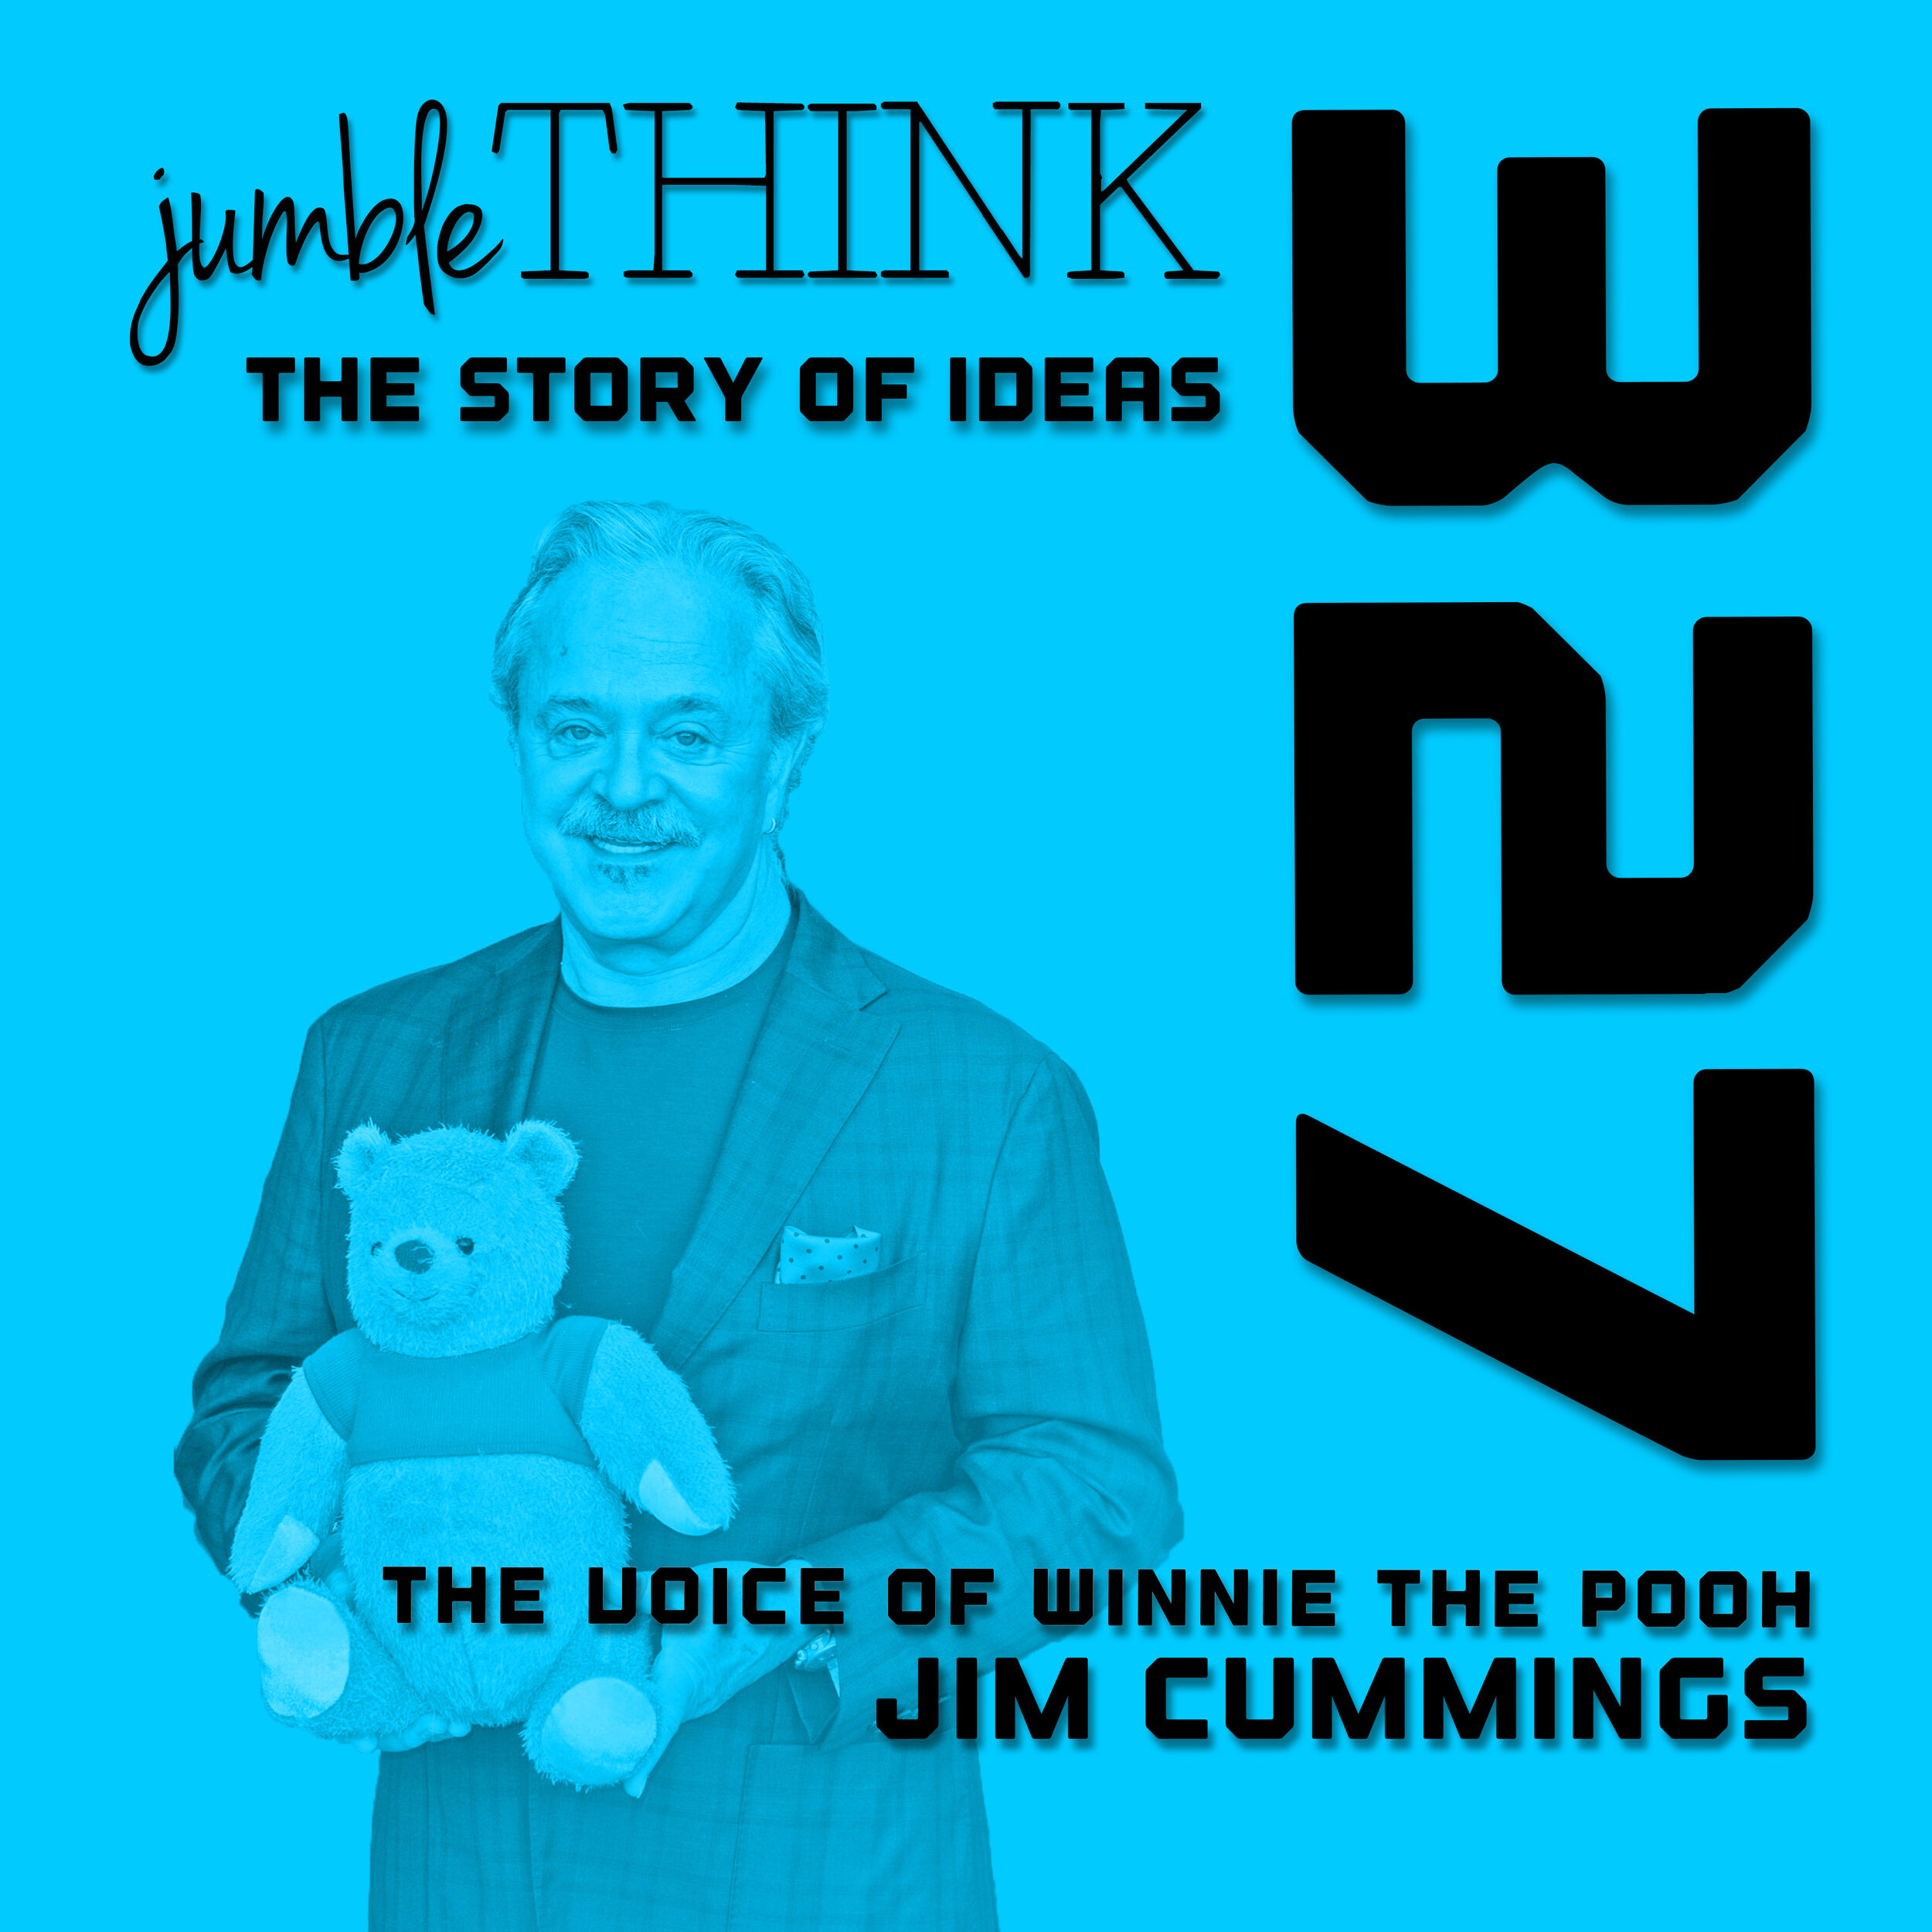 The Voice of Winnie the Pooh